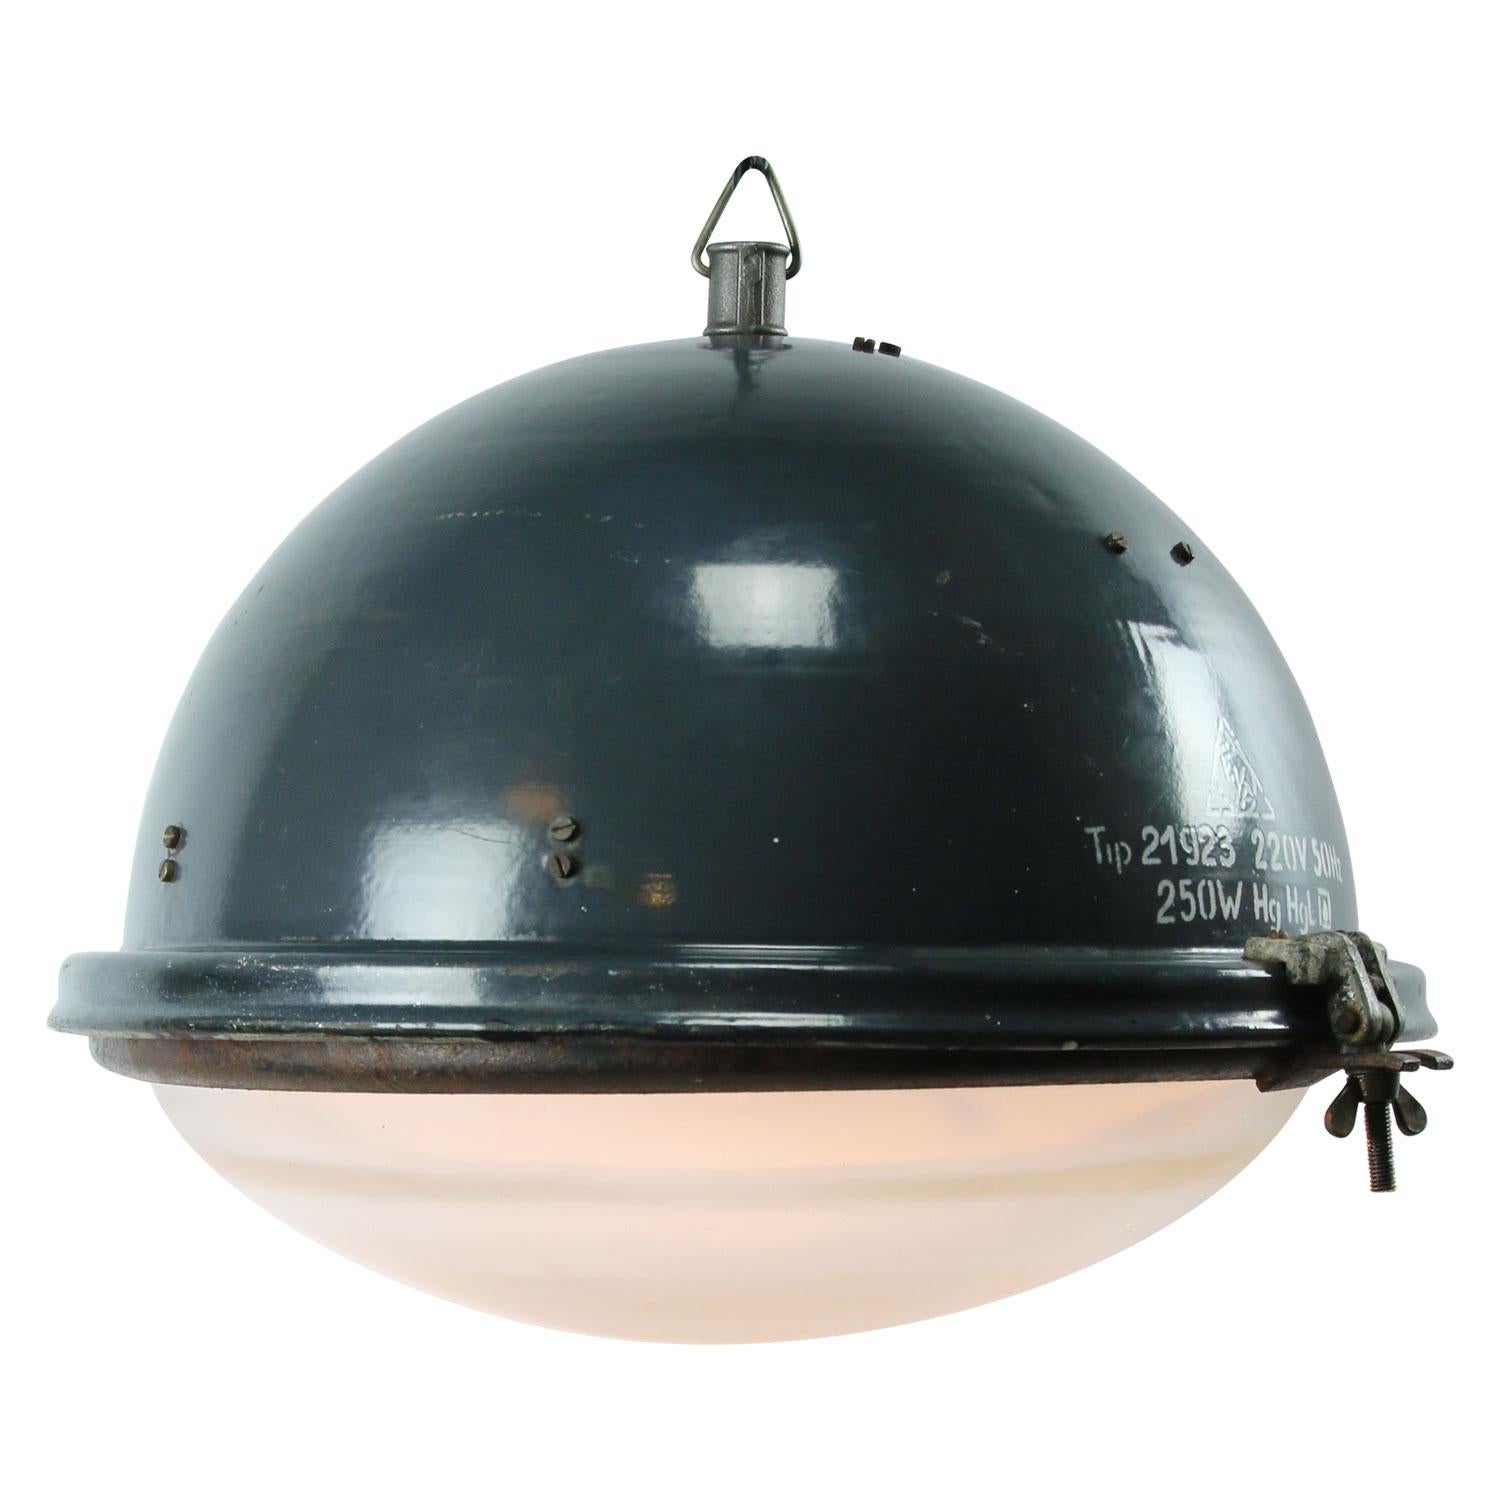 Factory pendant. Blue enamel white interior. Cast iron hook.
Clear glass.

Weight: 5.50 kg / 12.1 lb

Priced per individual item. All lamps have been made suitable by international standards for incandescent light bulbs, energy-efficient and LED